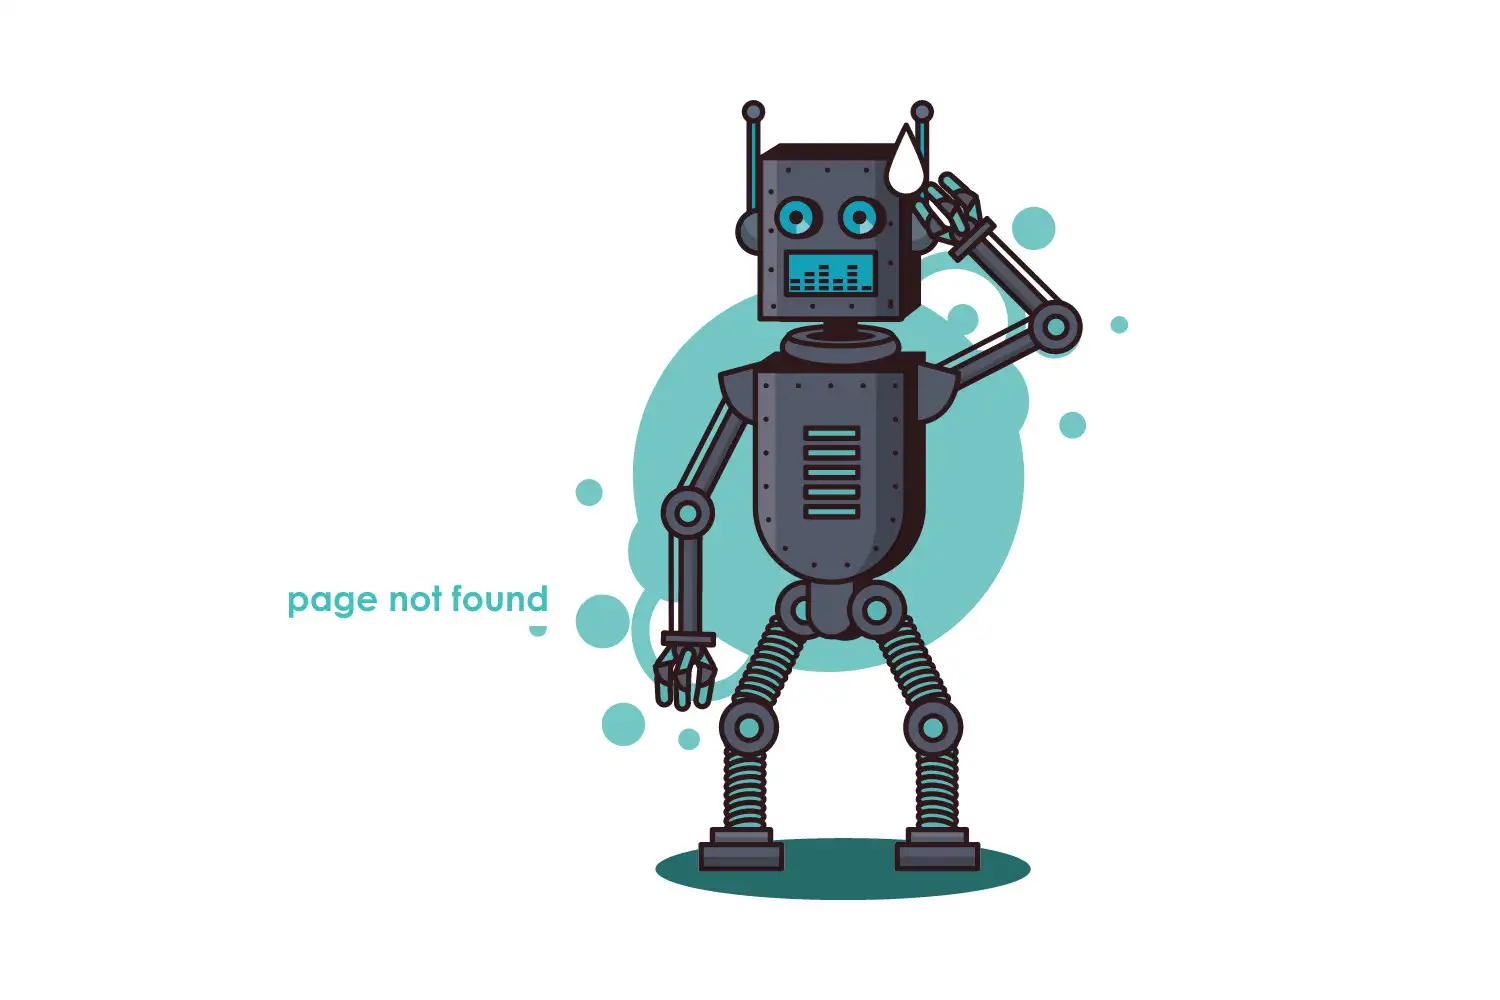 Search robot looking lost - why response codes matter.